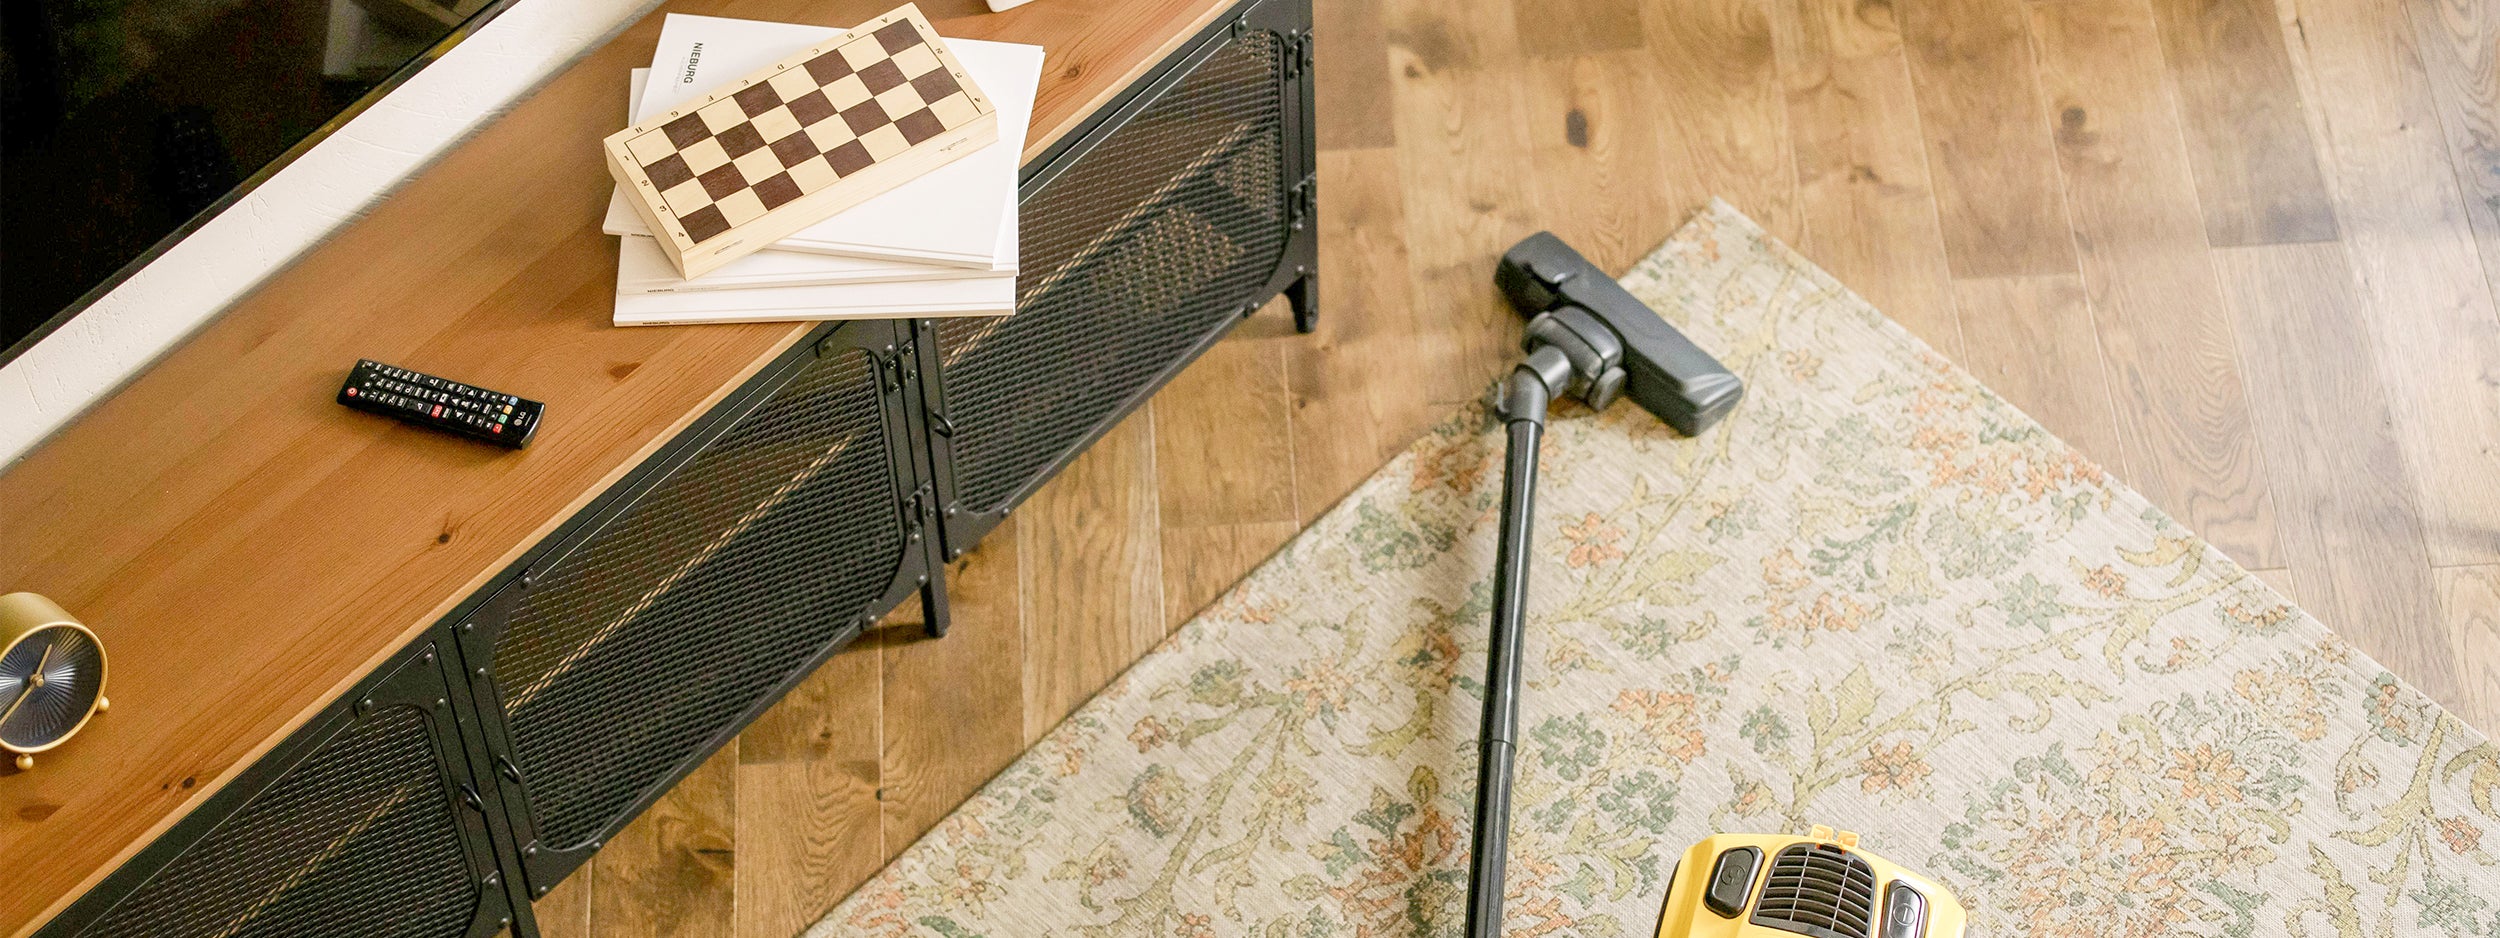 How to Vacuum Your Rug?